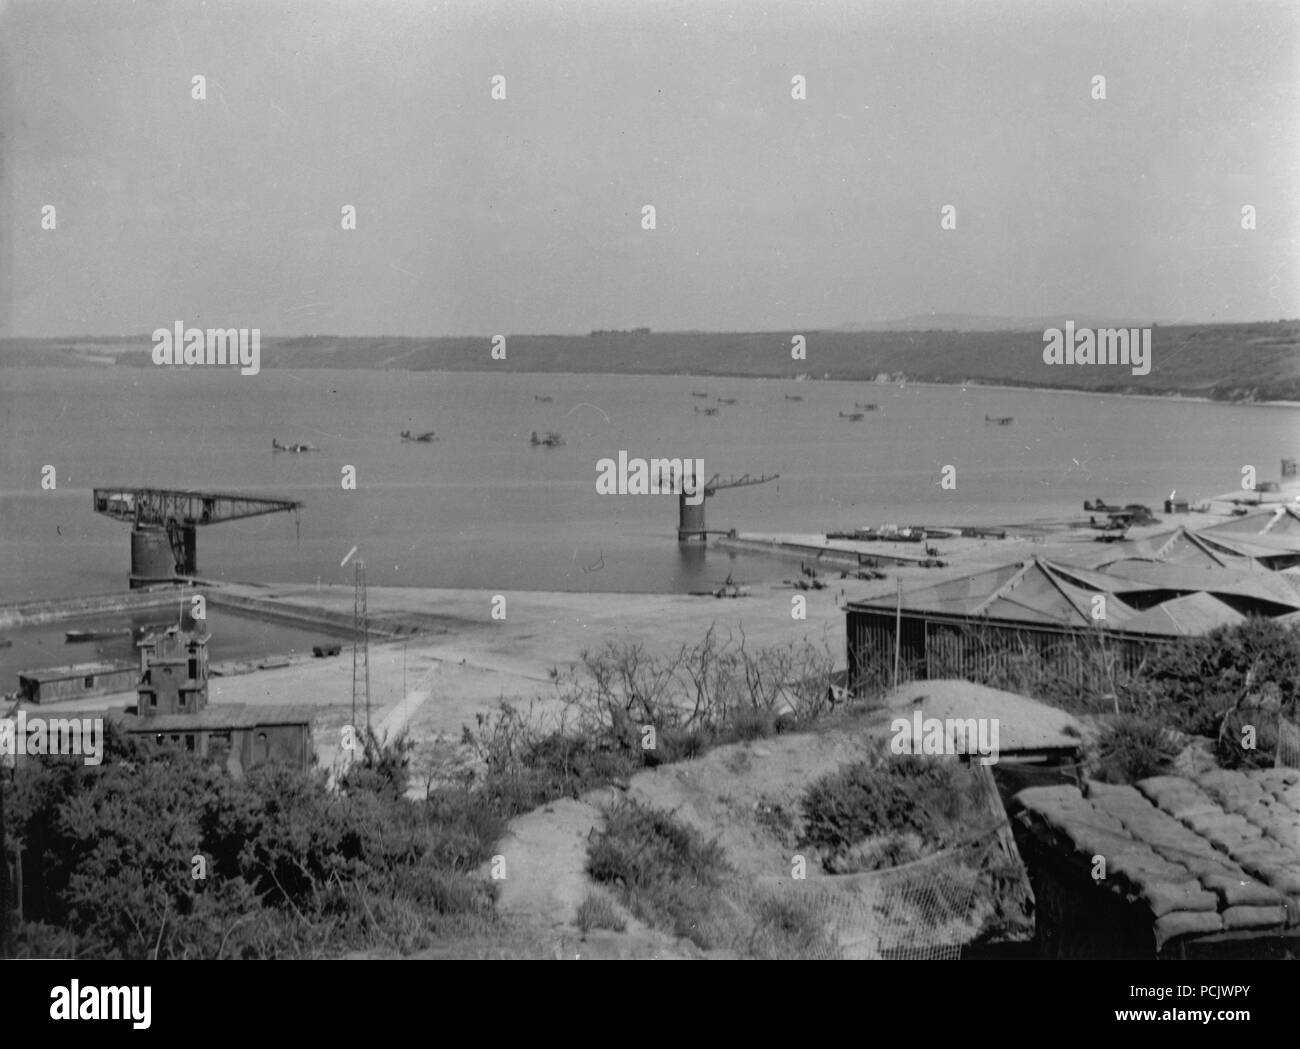 Image from the photo album of Oberleutnant Wilhelm Gaul - An array of Luftwaffe floatplanes, including Heinkel He 115s and Dornier Do 24s, fill the harbour at Brest in 1941 or 1942. Stock Photo